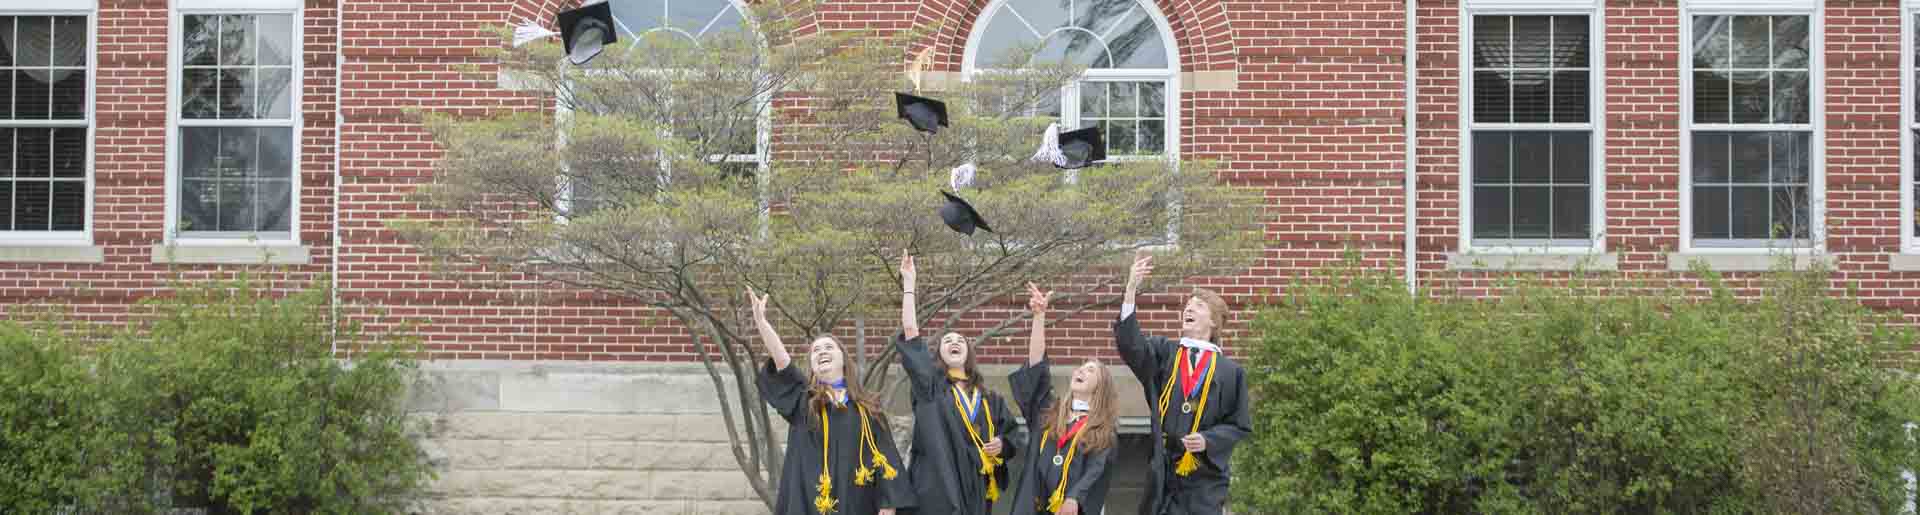 Oxford students throwing their caps while dressed in graduation regalia.